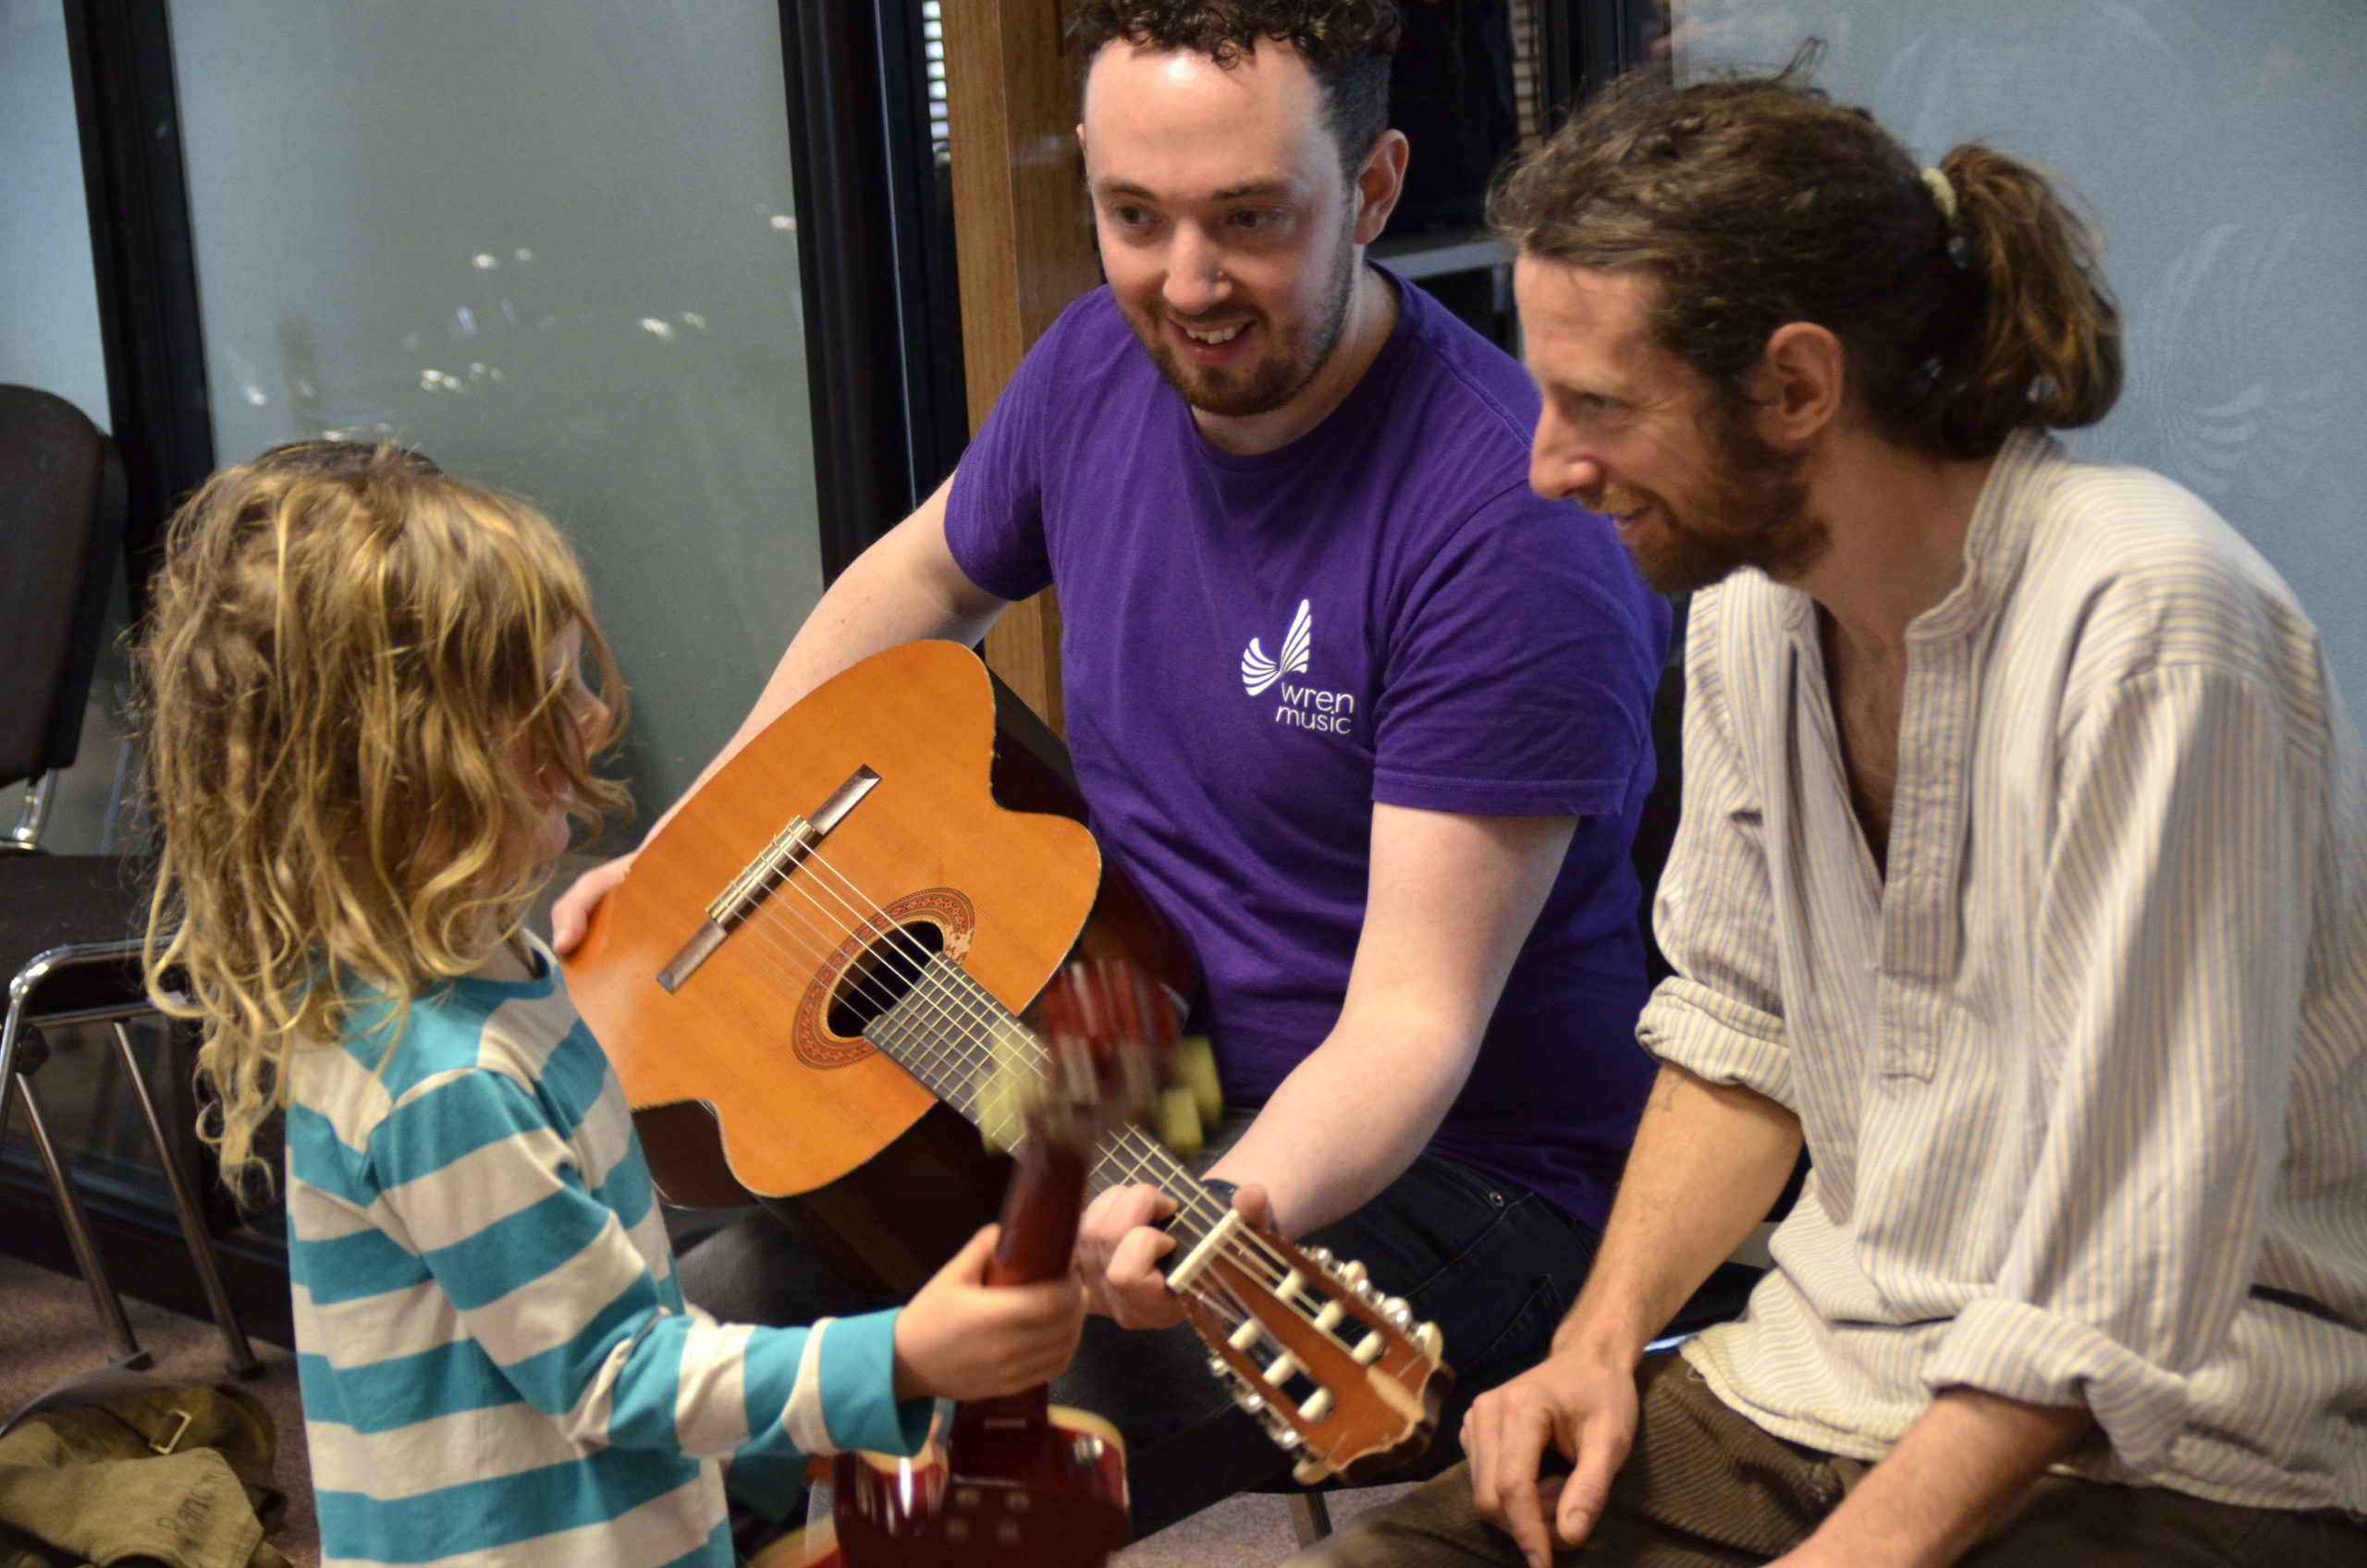 Jon Dyer of Wren Music with guitar, dad and daughter